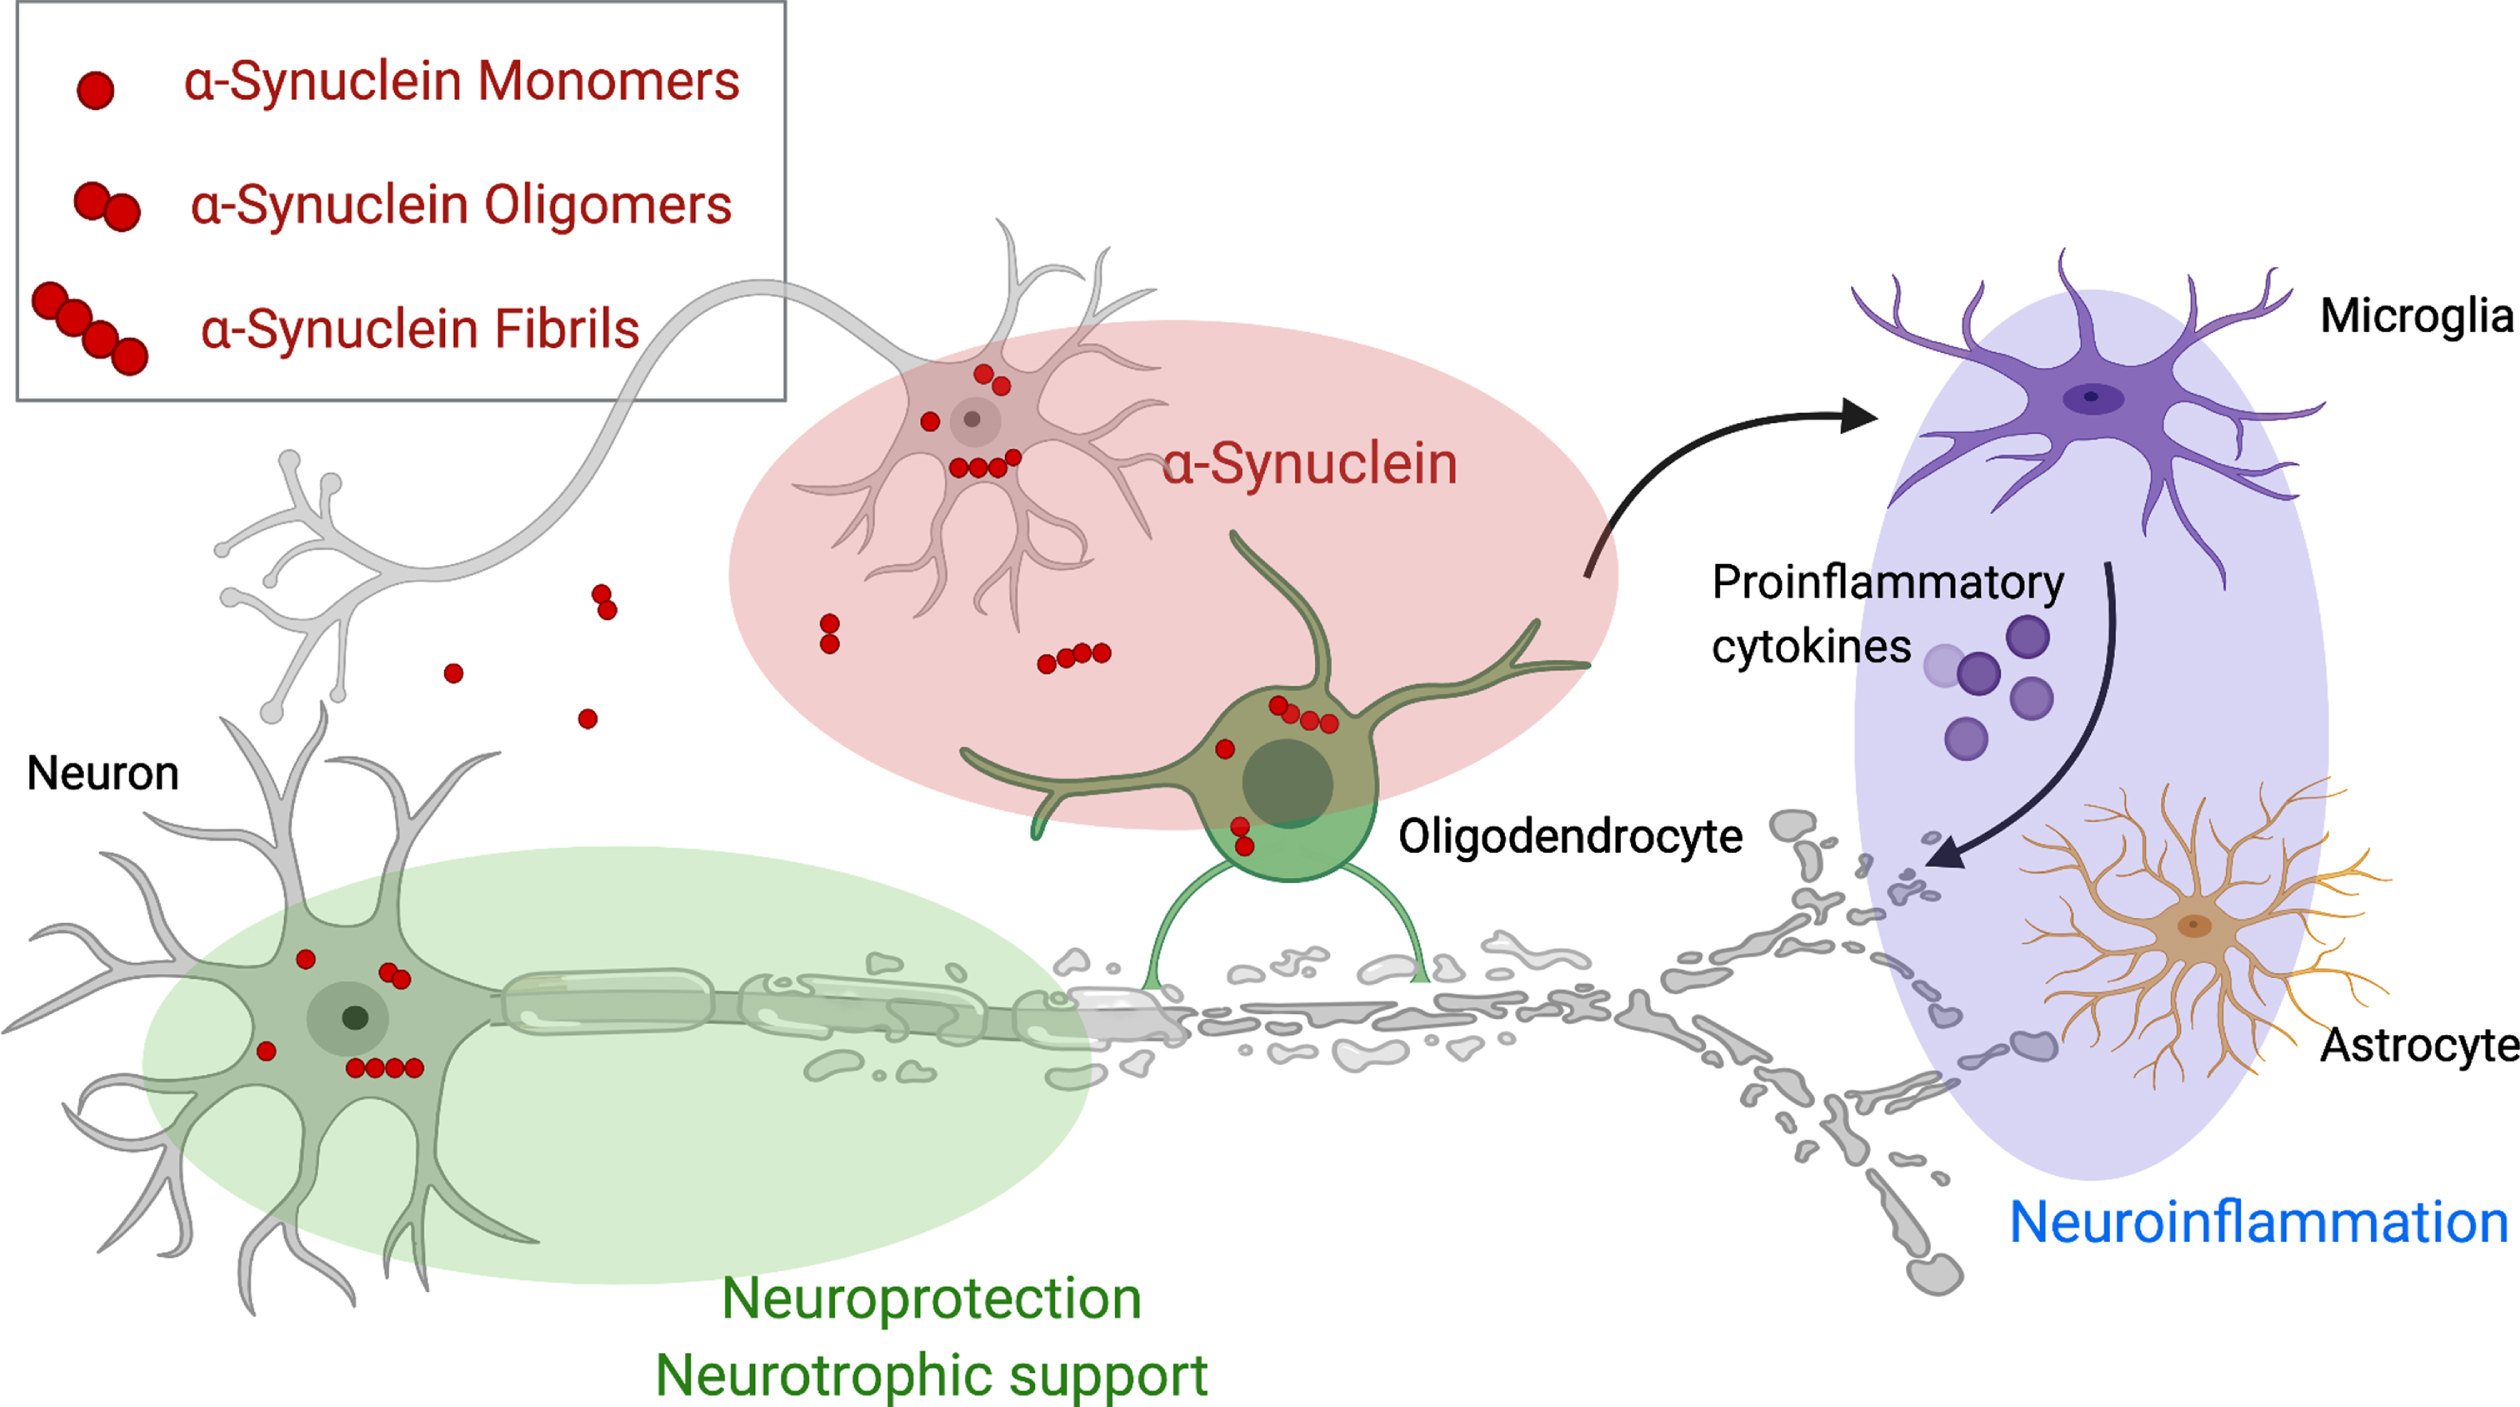 Therapeutic targets for disease modifying therapies in multiple system atrophy. This figure demonstrates pathological mechanisms underlying Multiple system atrophy and potential disease modifying targets including aggregation, spreading and clearance of α-synuclein (red), neurotrophic support (green) and the cascade of neuroinflammation (violet). Created with BioRender.com.